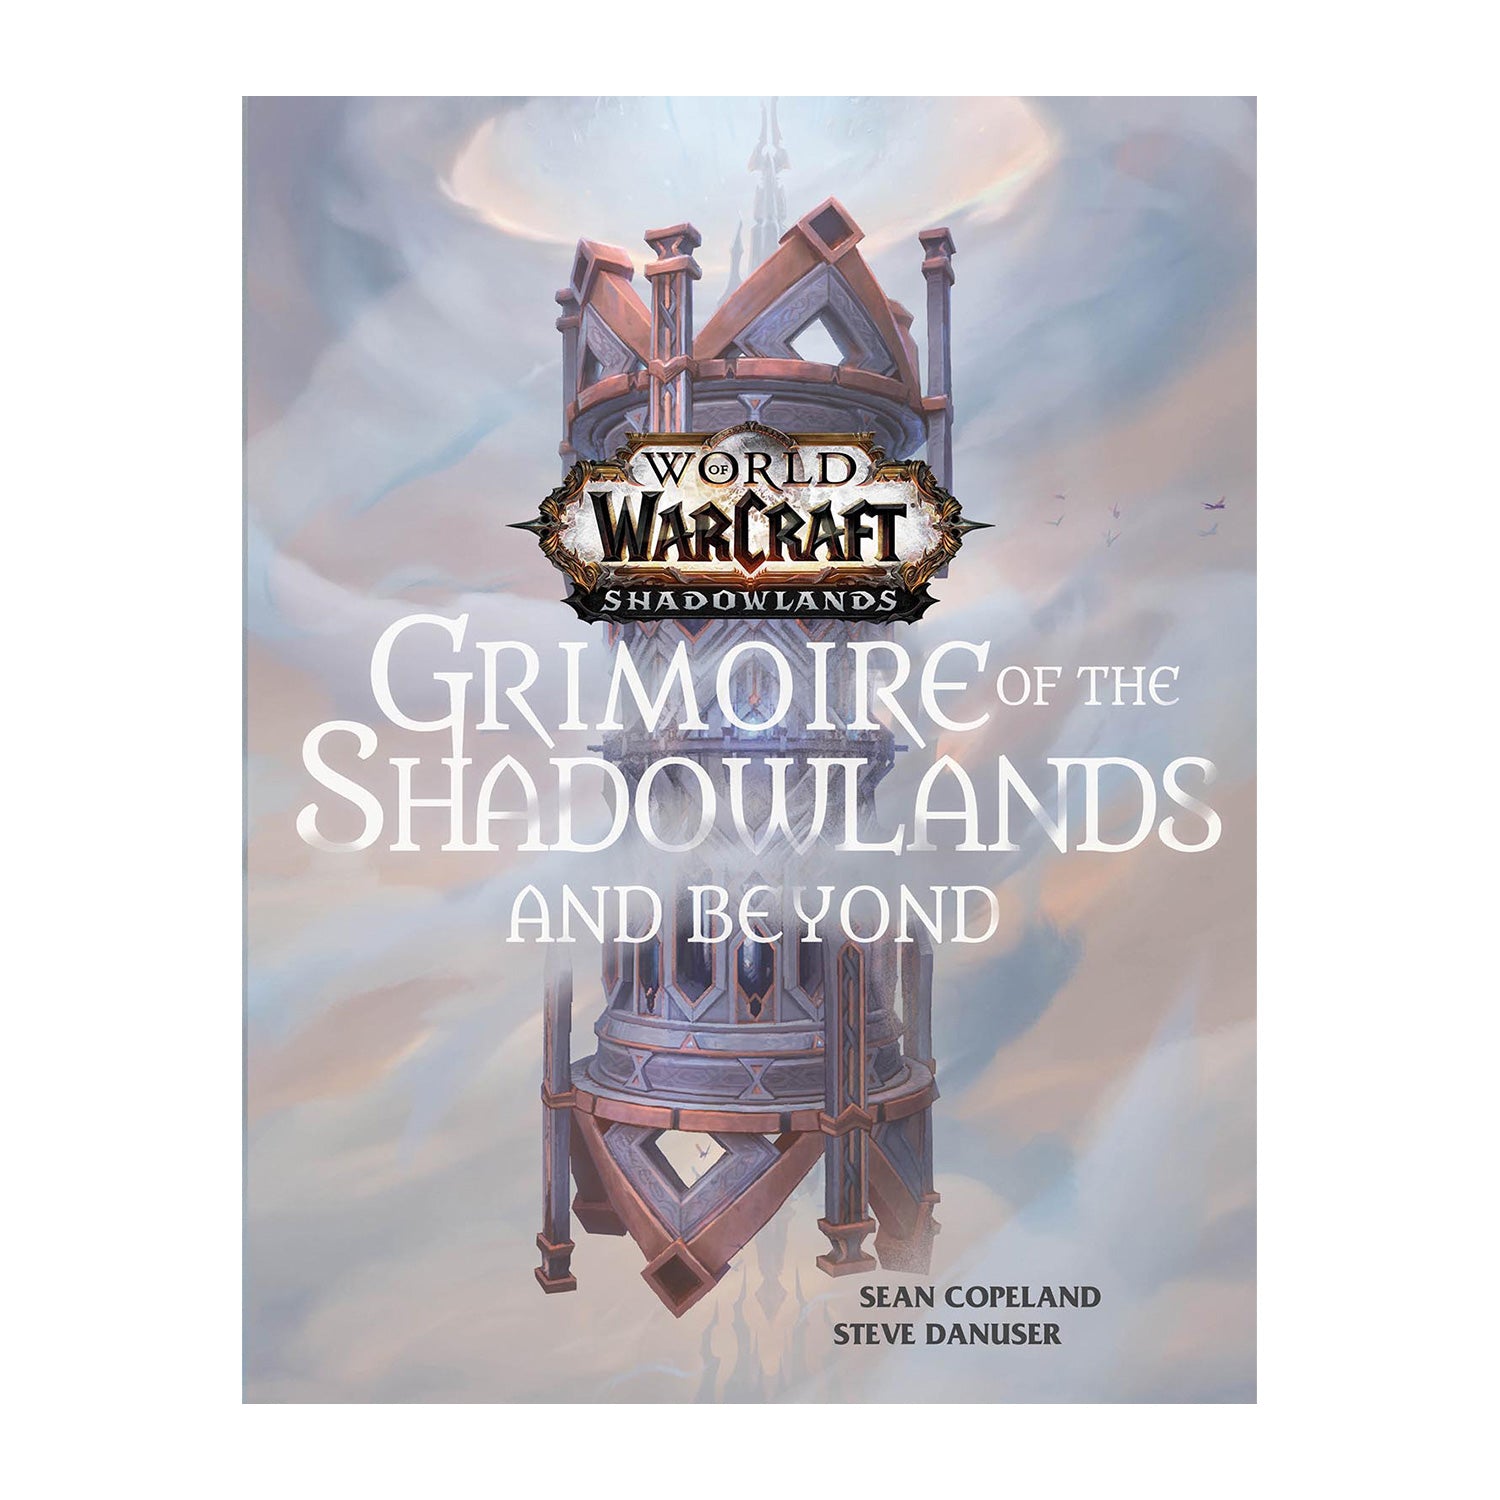 World of Warcraft Shadowlands: Grimoire of the Shadowlands and